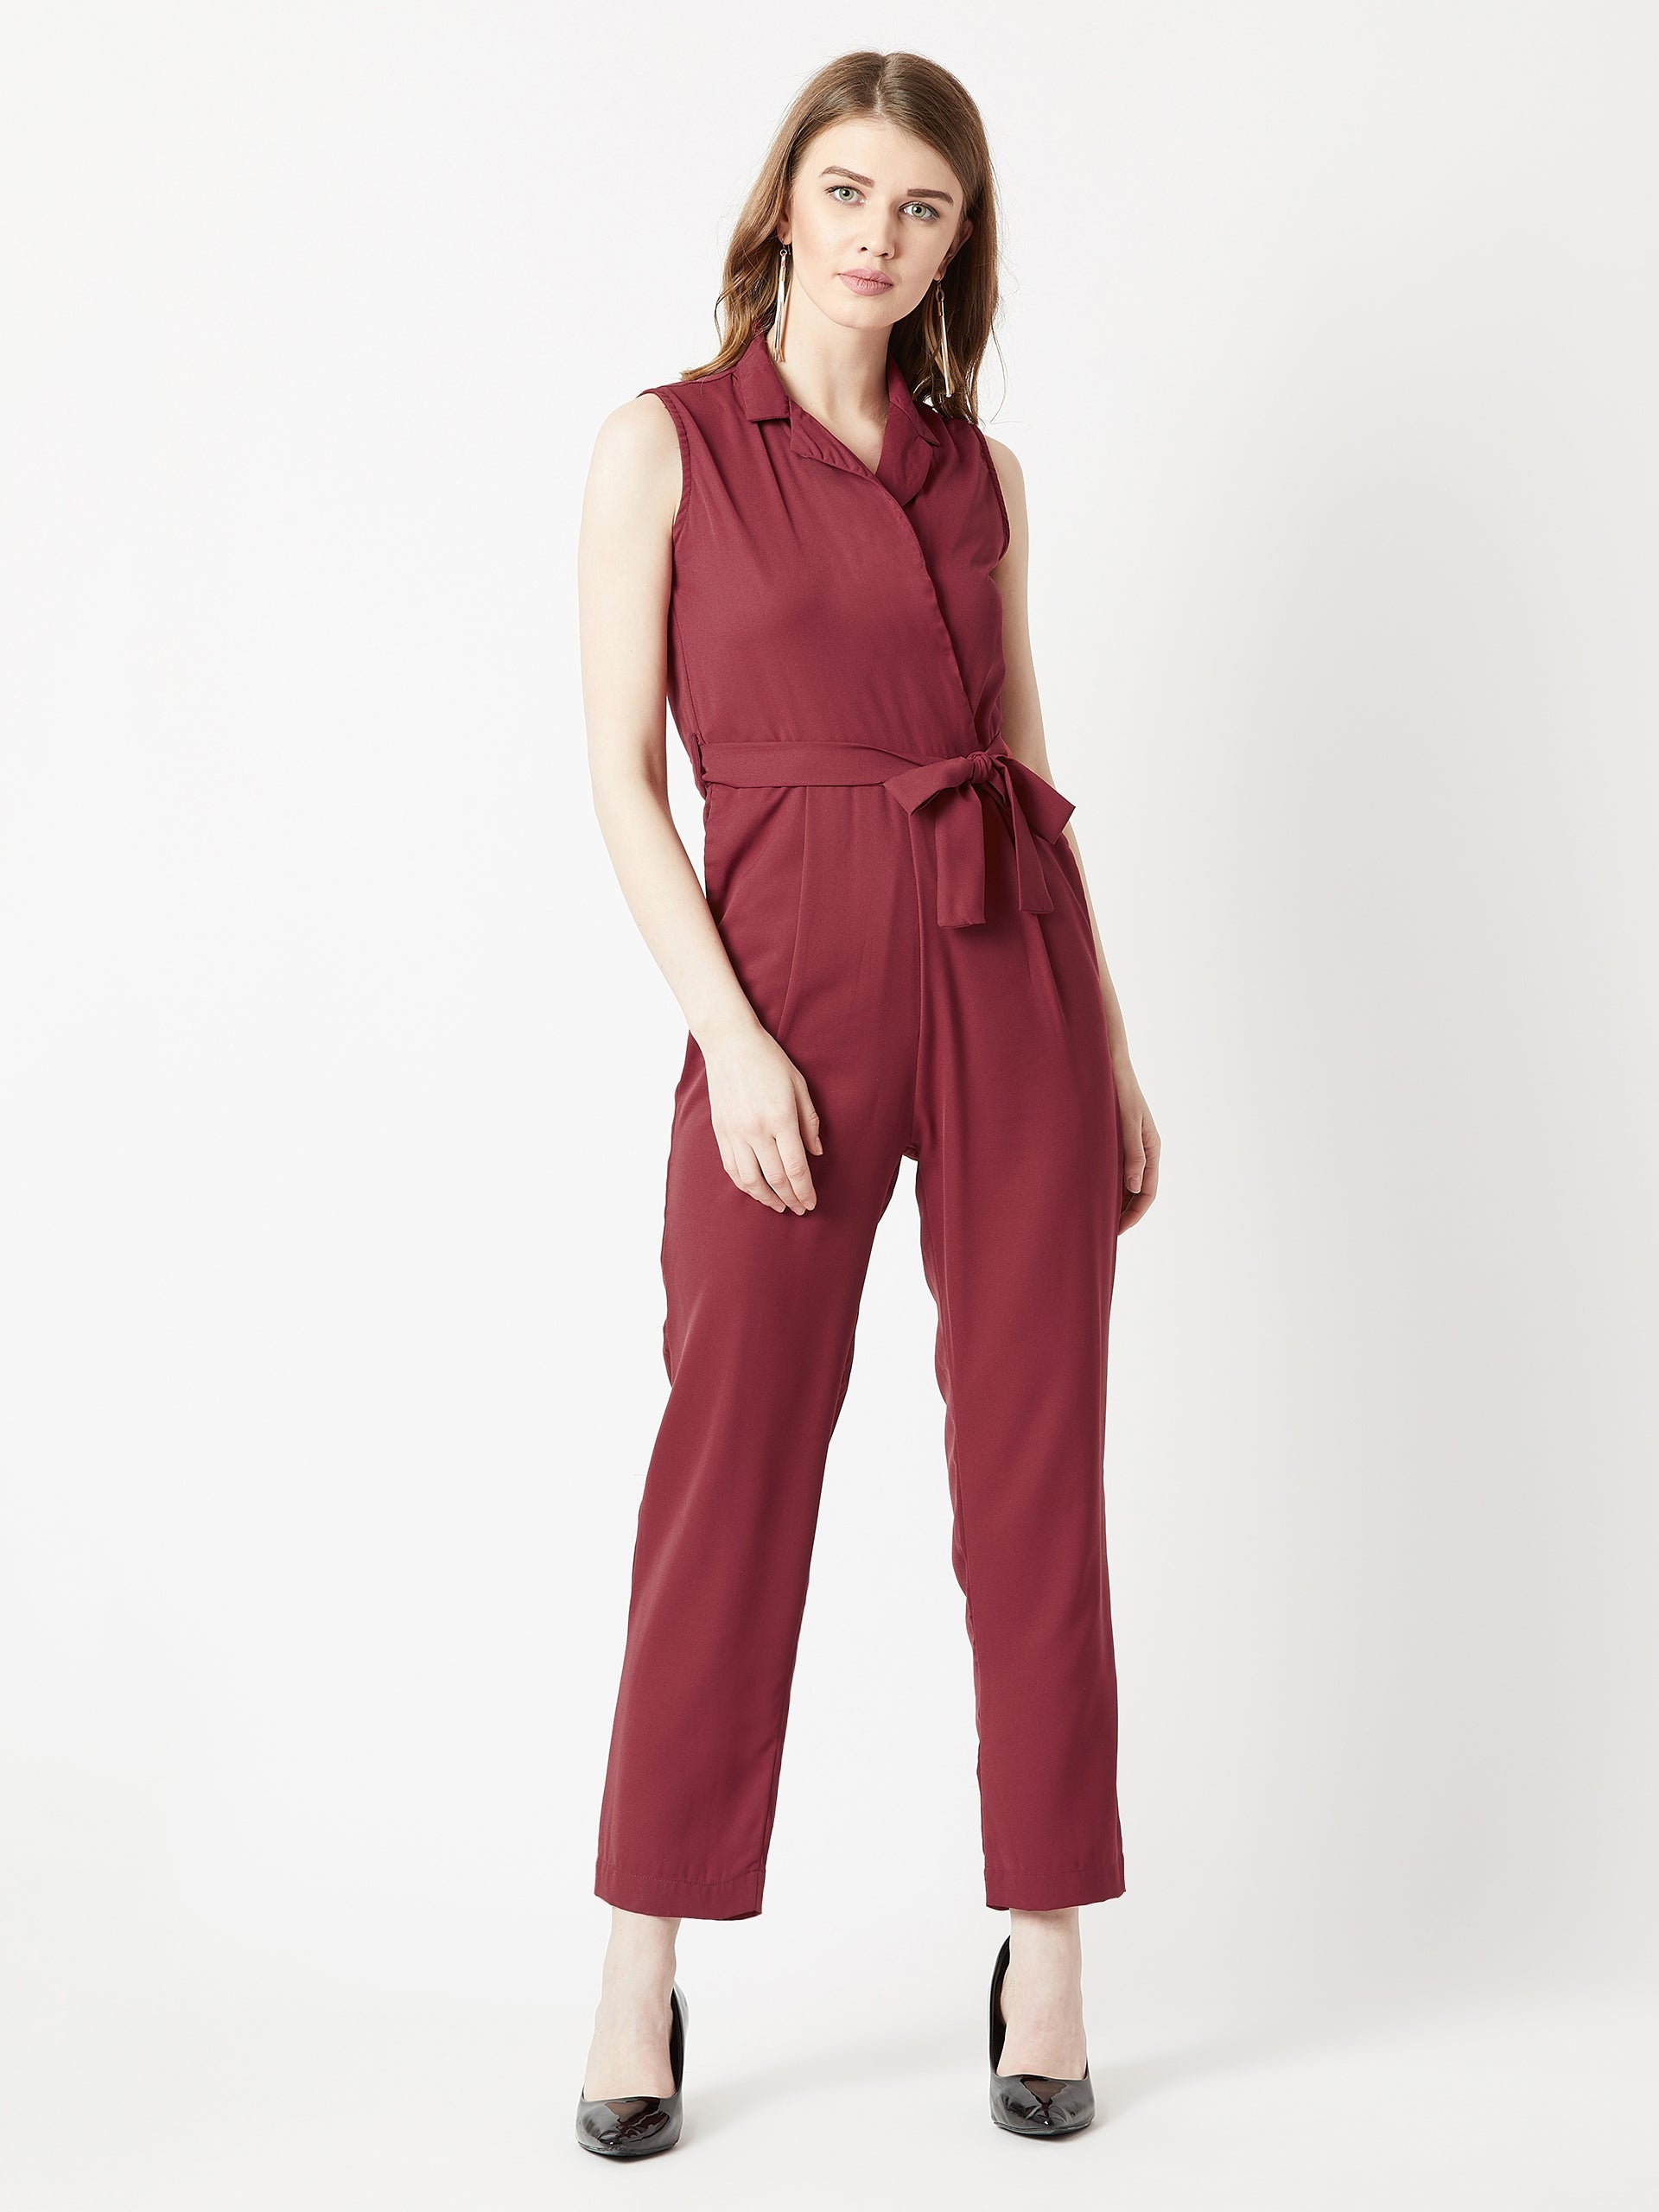 MISS CHASE | Maroon V-Neck Sleeveless Straight Leg Tie-Up Solid Belted Wrap Jumpsuit